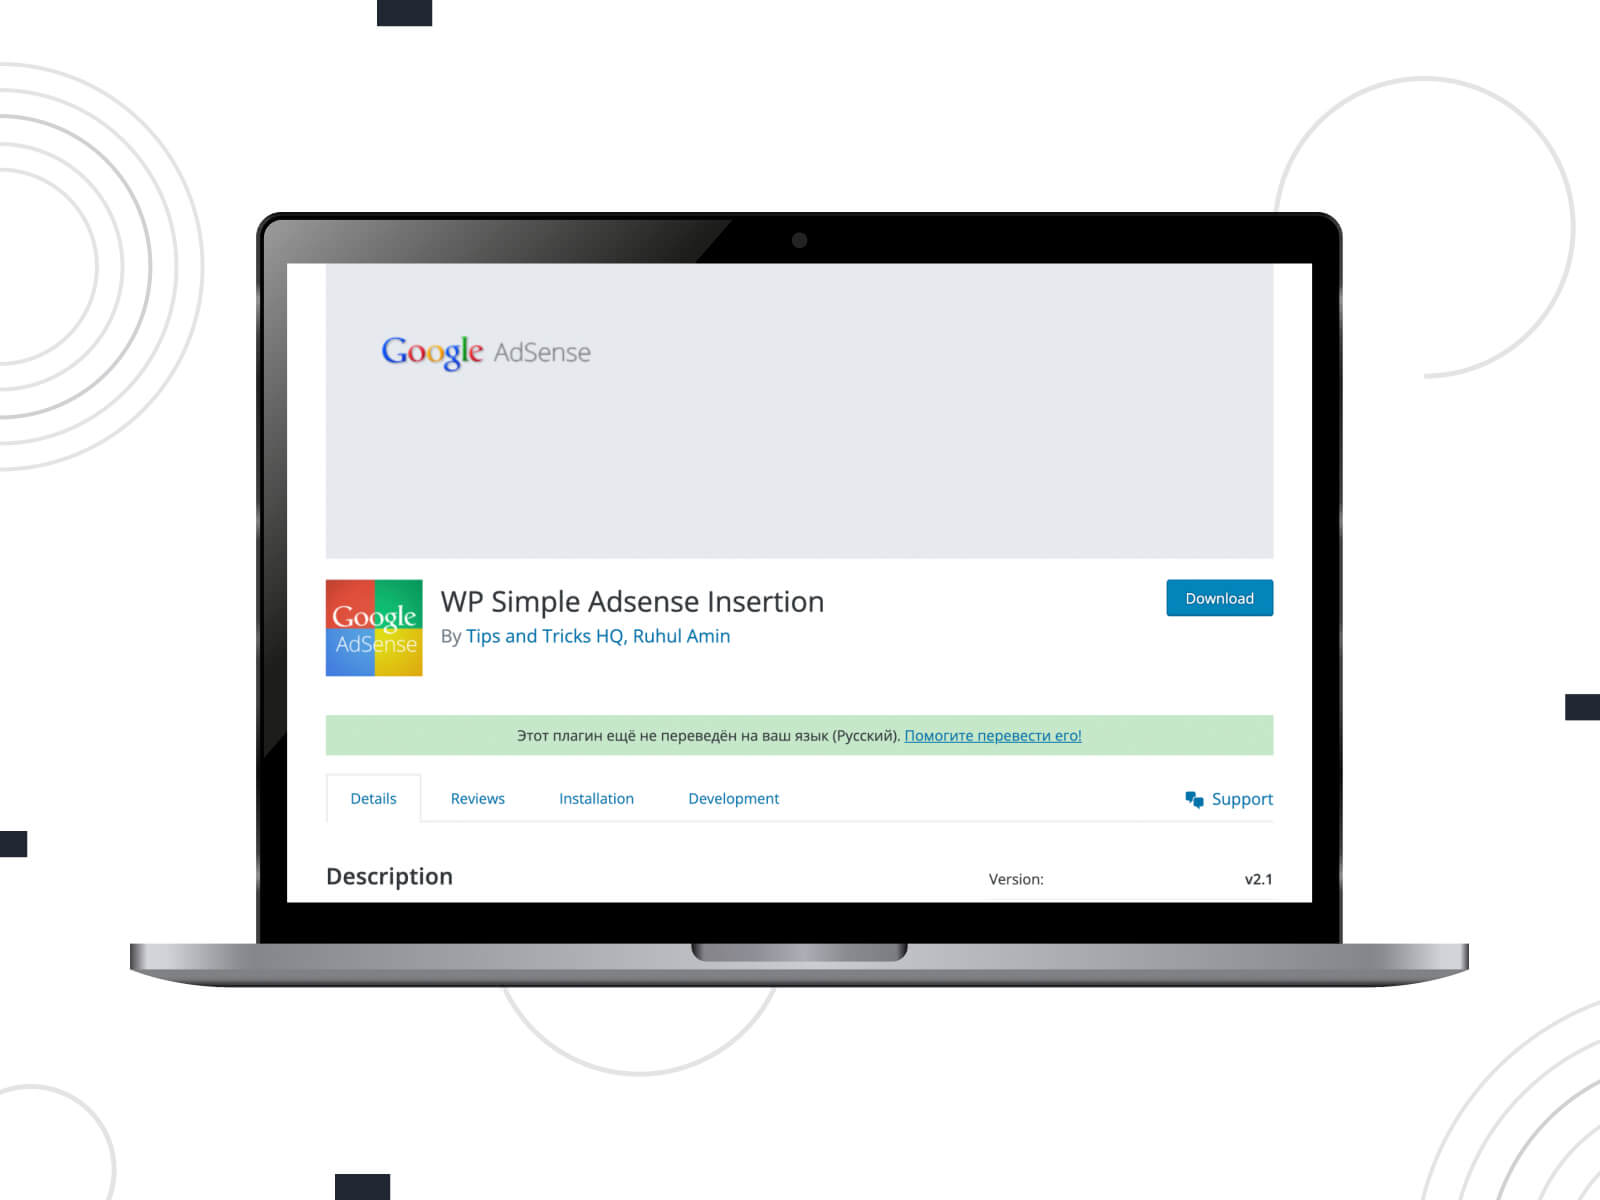 WP Simple Adsense Insertion - WordPress plugin for management of advertisements with focus on Adsense.